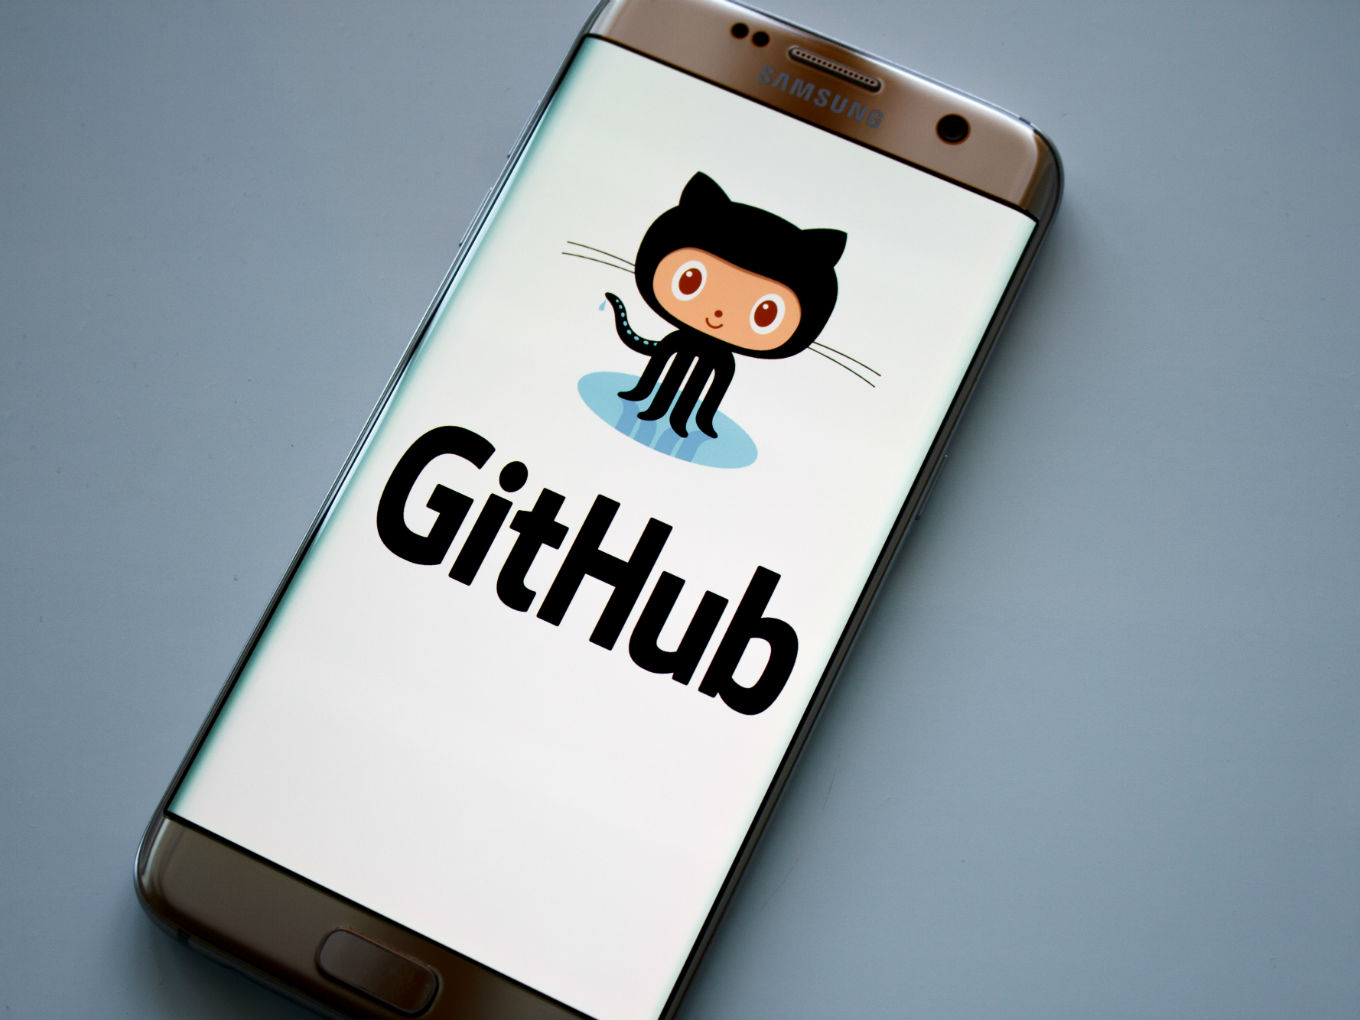 Github Looking For India Lead To Build On Growth Story